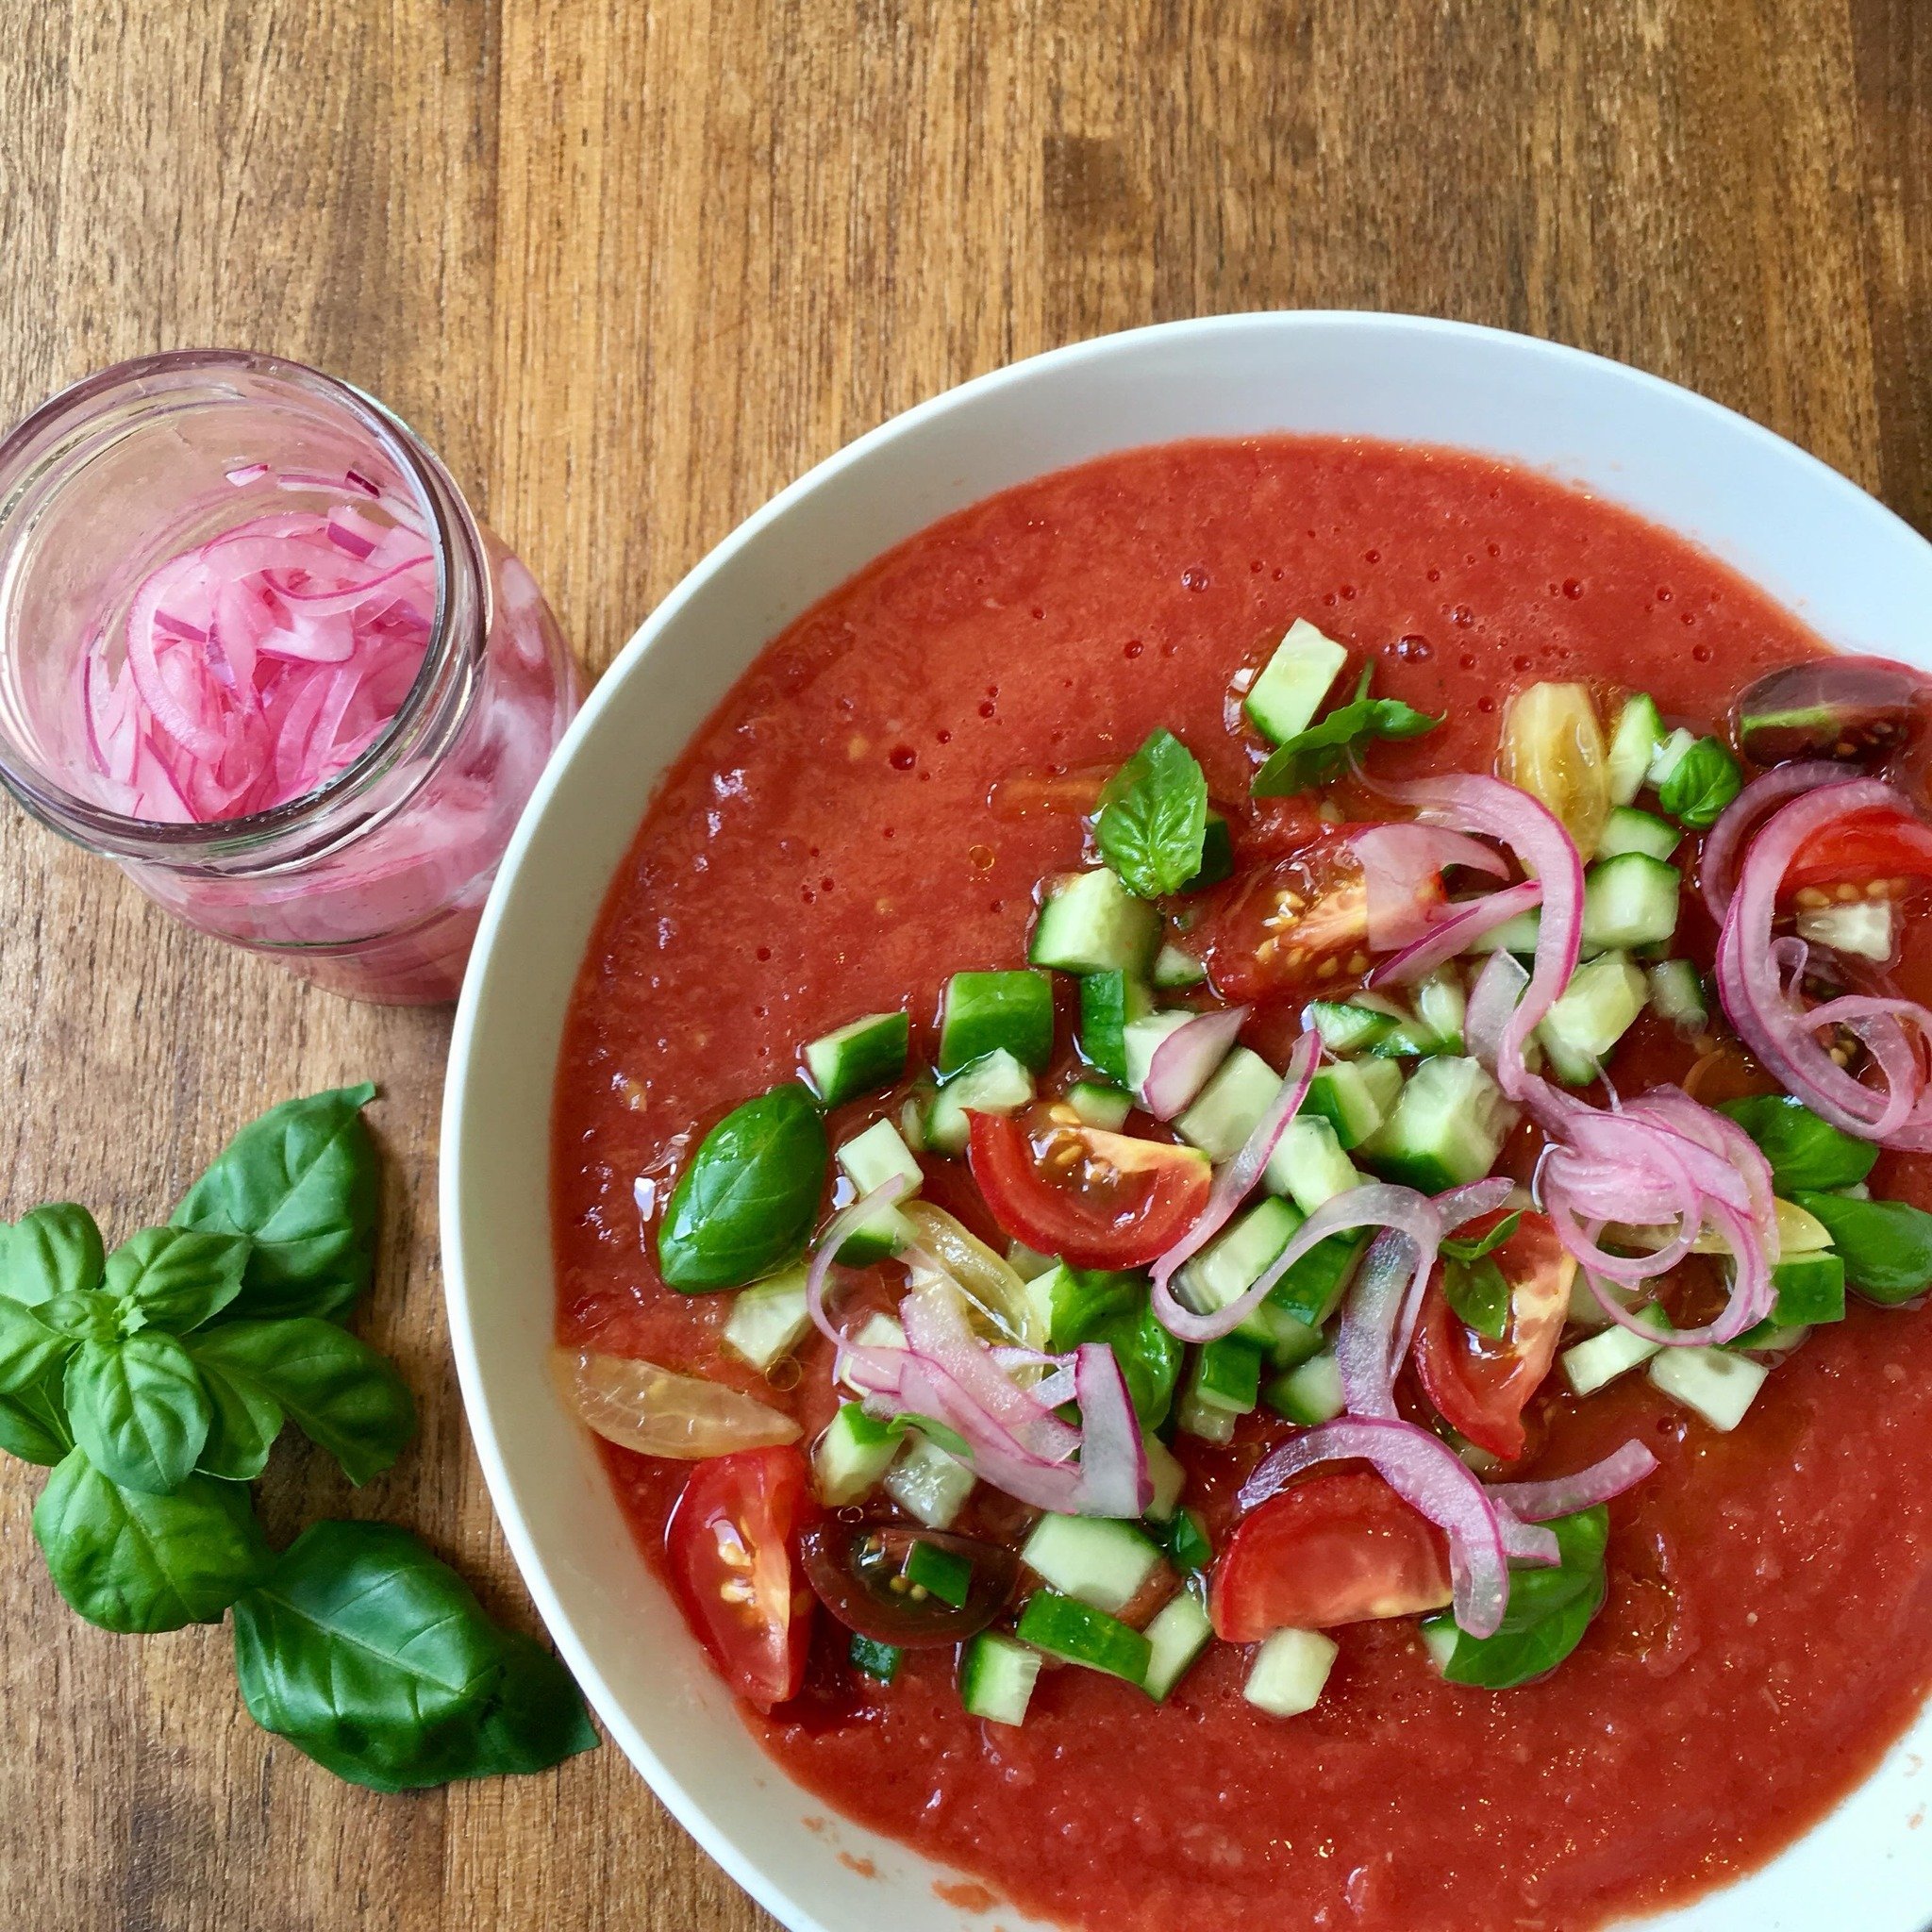 We&rsquo;re heading into summer and one of my favorite ways to enjoy the bounty of summer is by making fresh gazpacho! 🍅🥒🧅🧄

We can&rsquo;t get enough of the fresh, vibrant and special flavor that vine-ripened, organic 🍅🍅🍅 provide in this refr